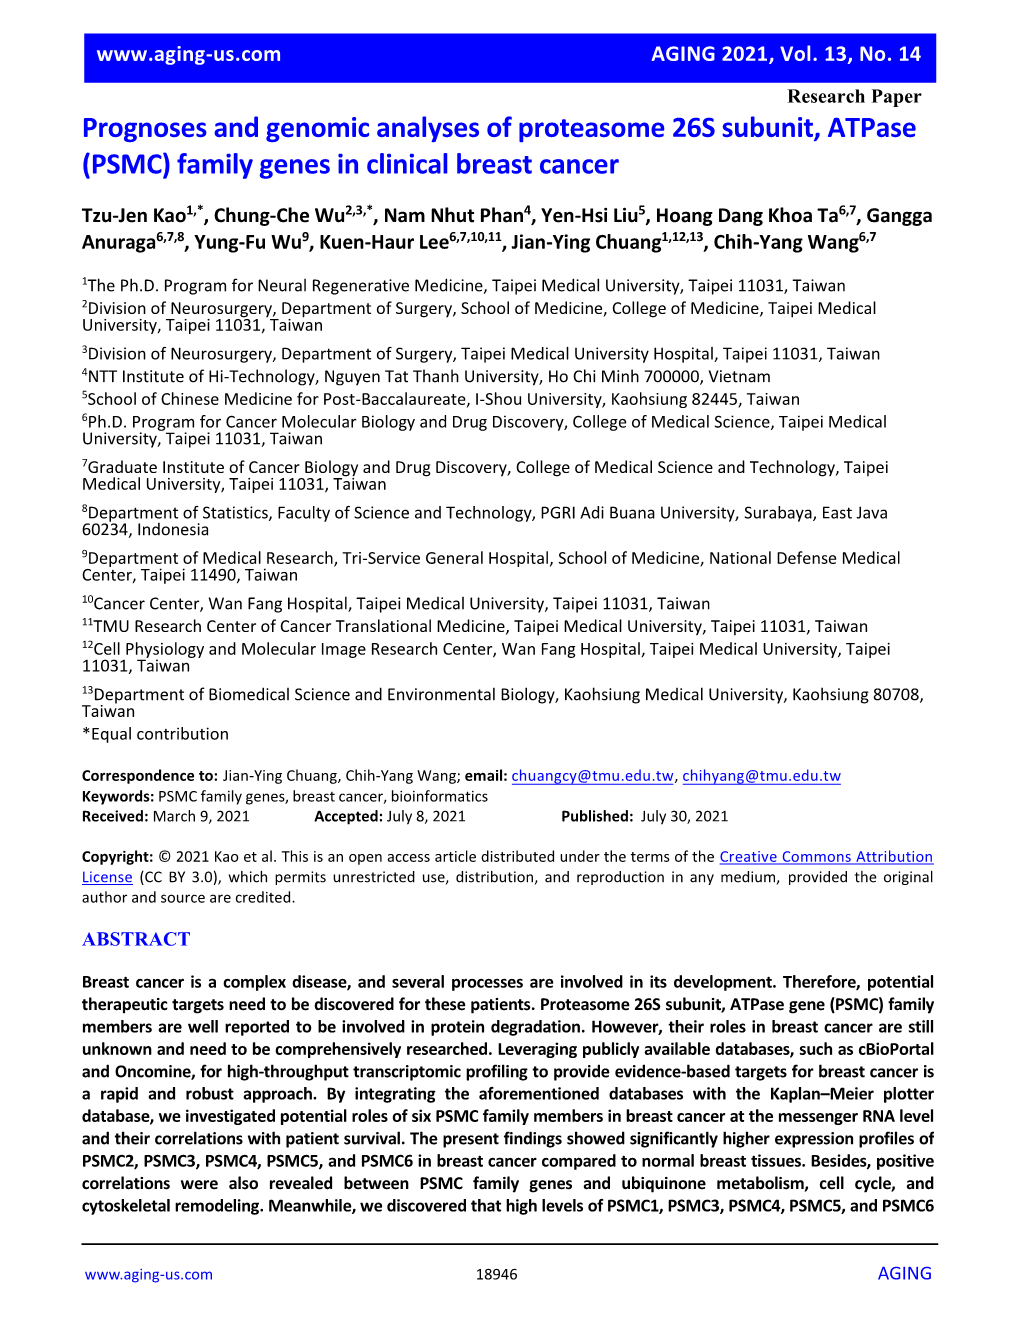 Family Genes in Clinical Breast Cancer